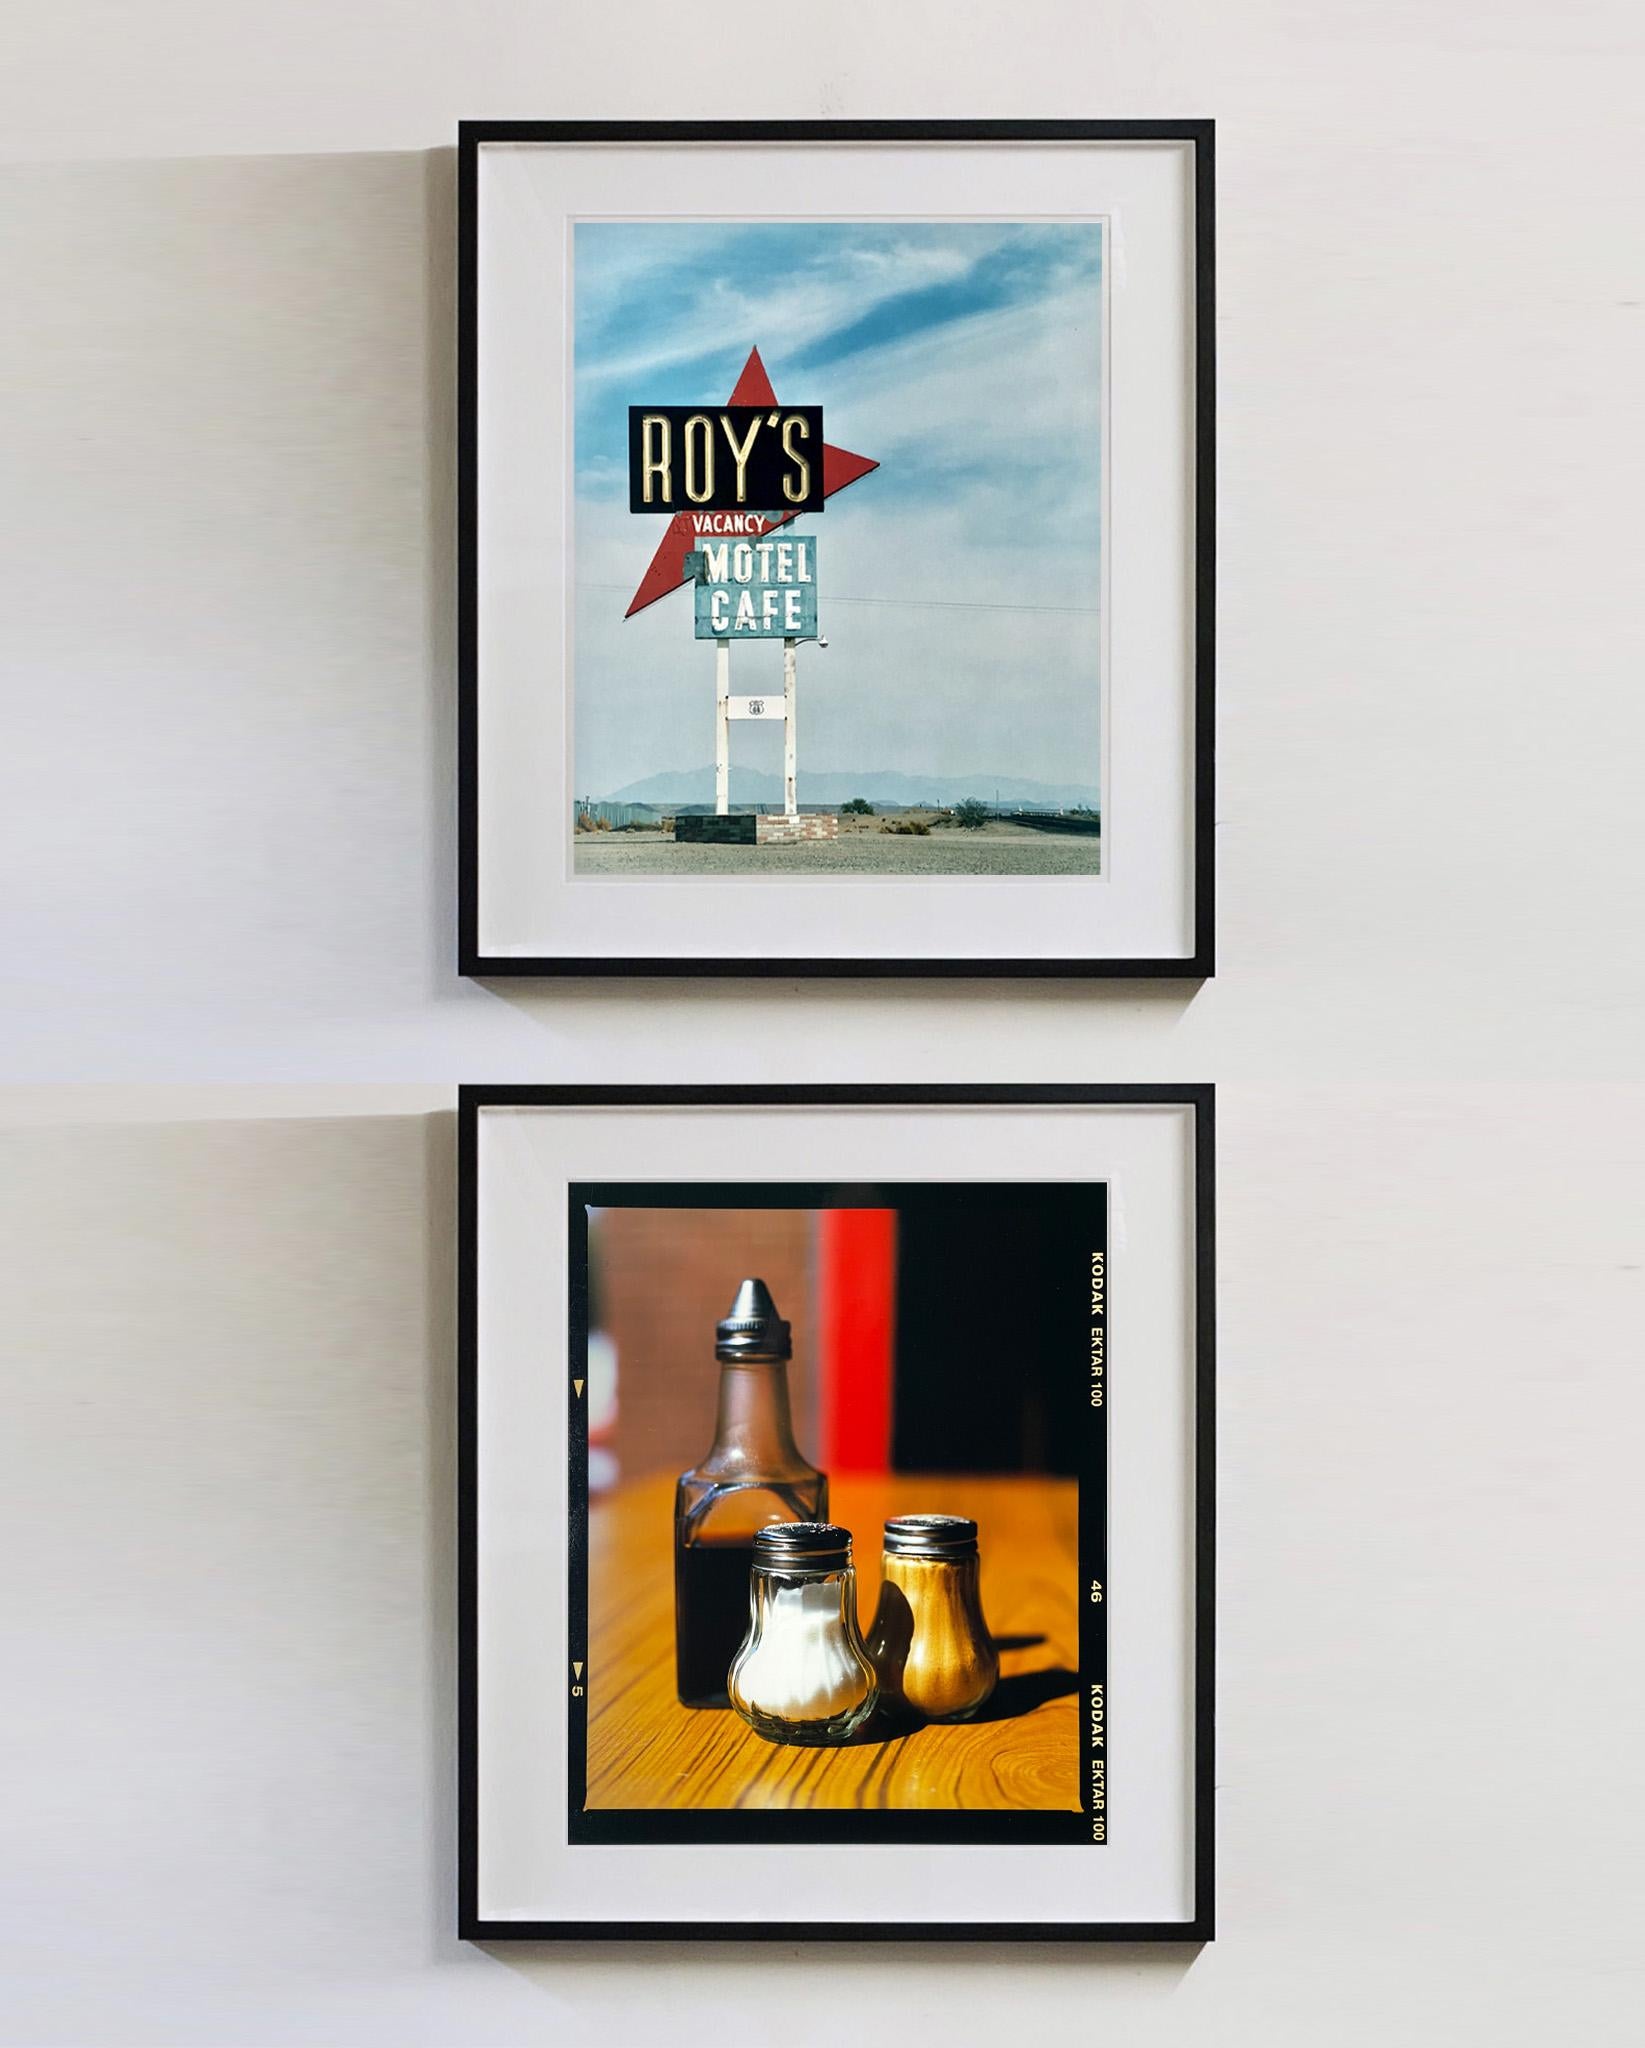 Salt, Pepper and Vinegar, Clacton-on-Sea - Still Life Color Photography For Sale 5